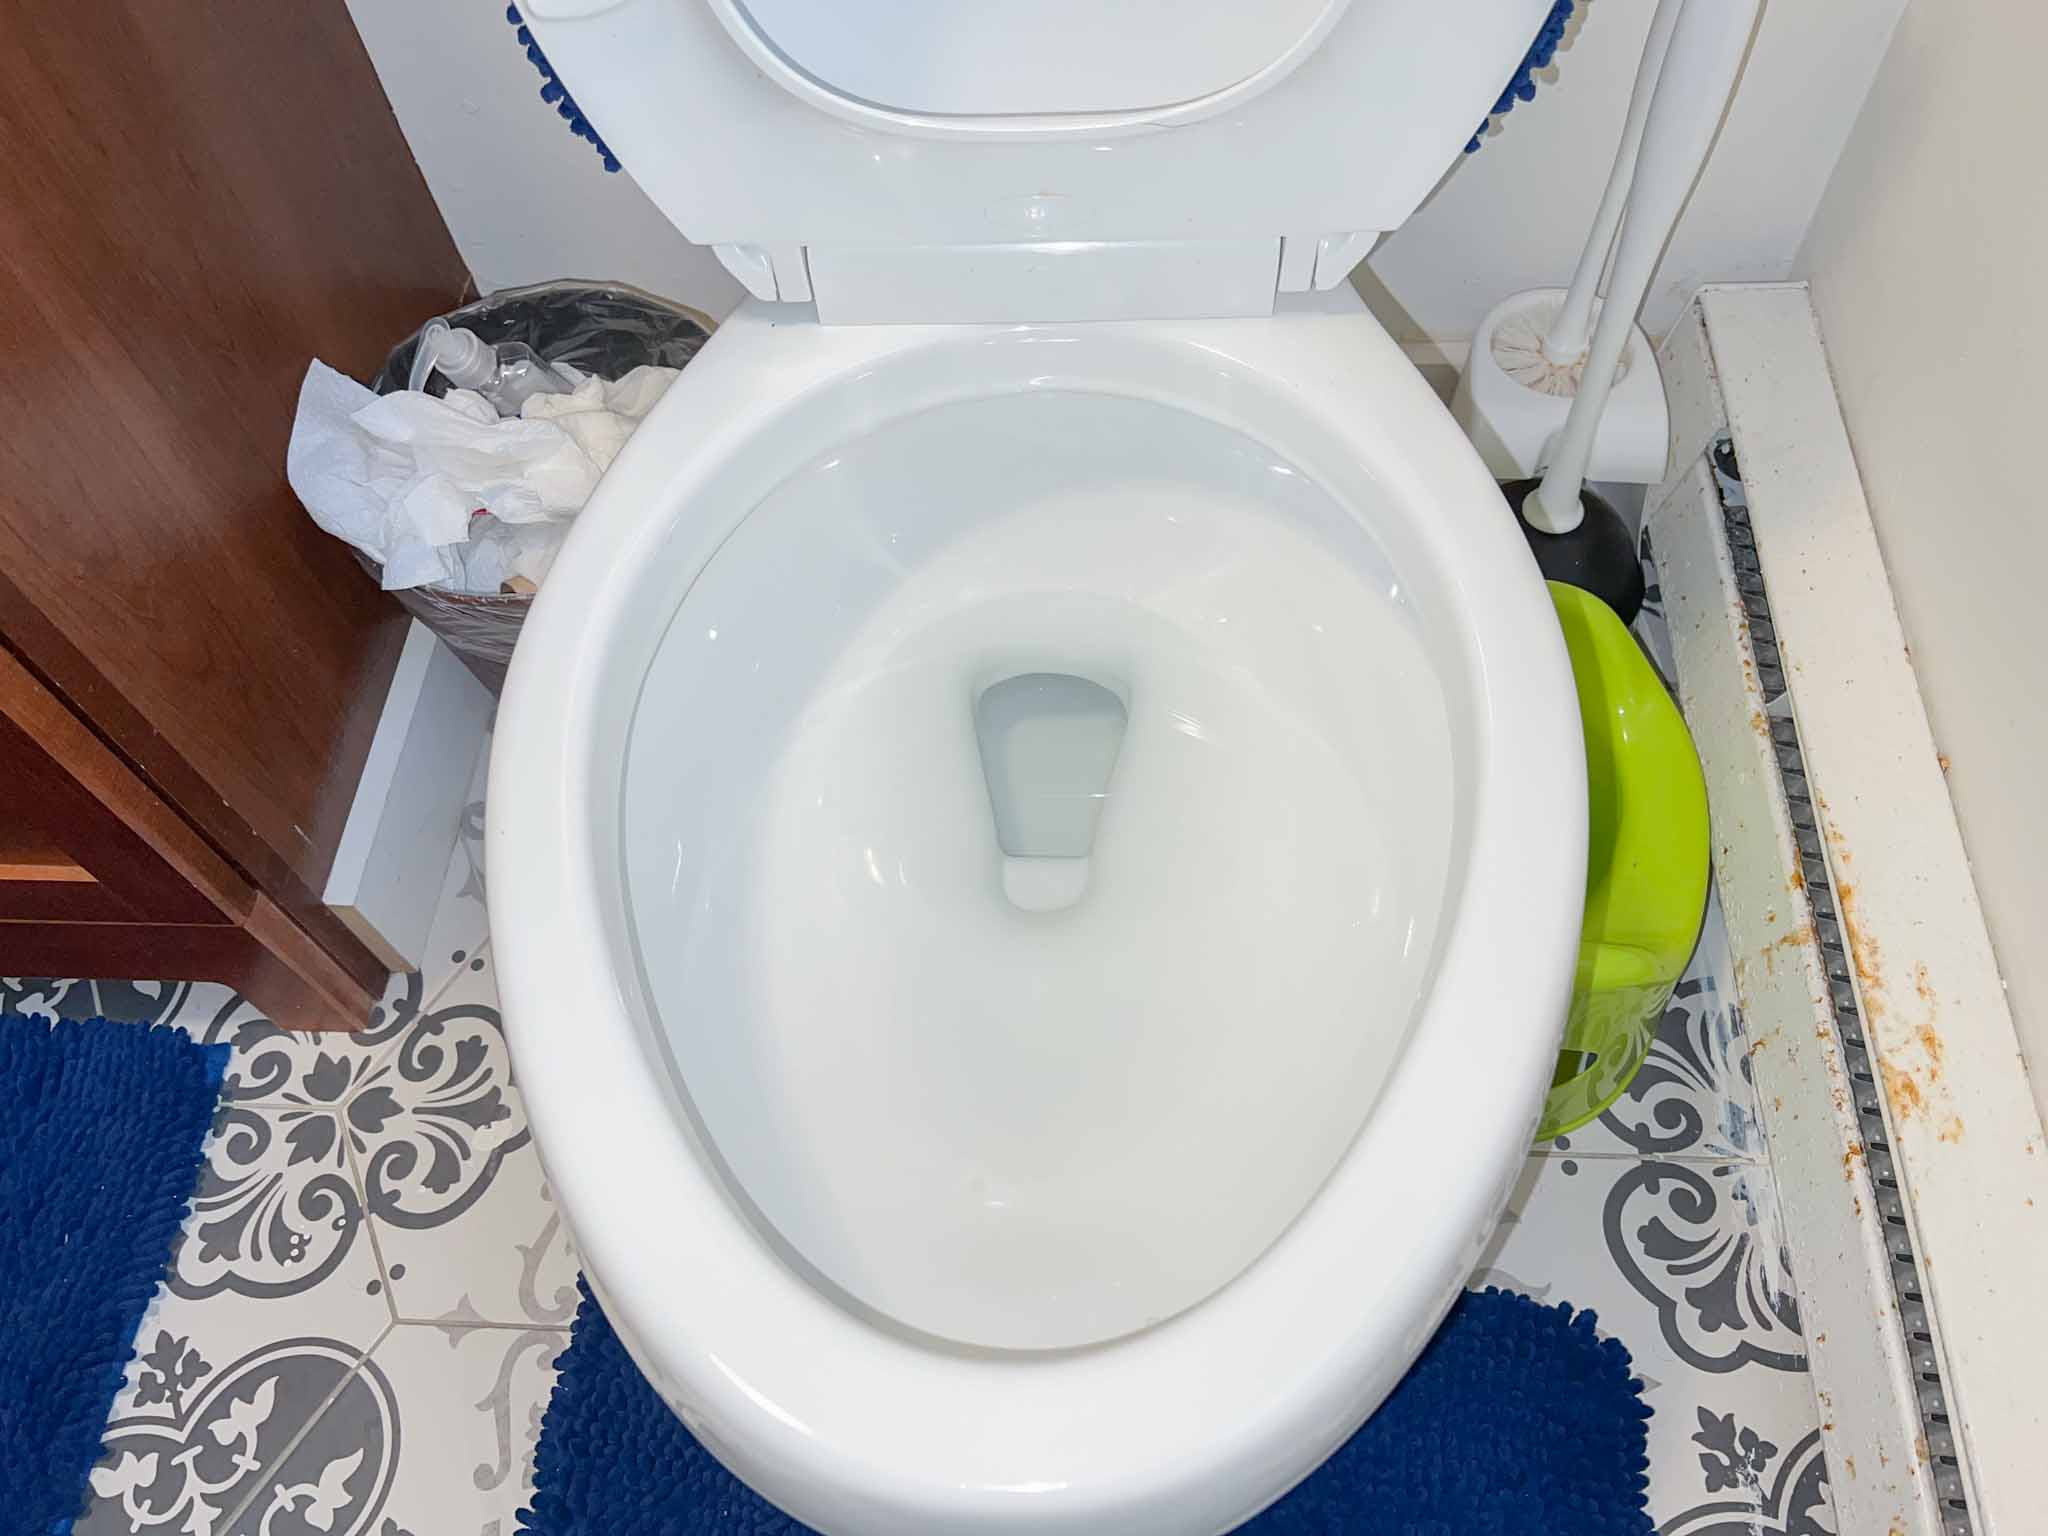 cleaning urine from toilet seat